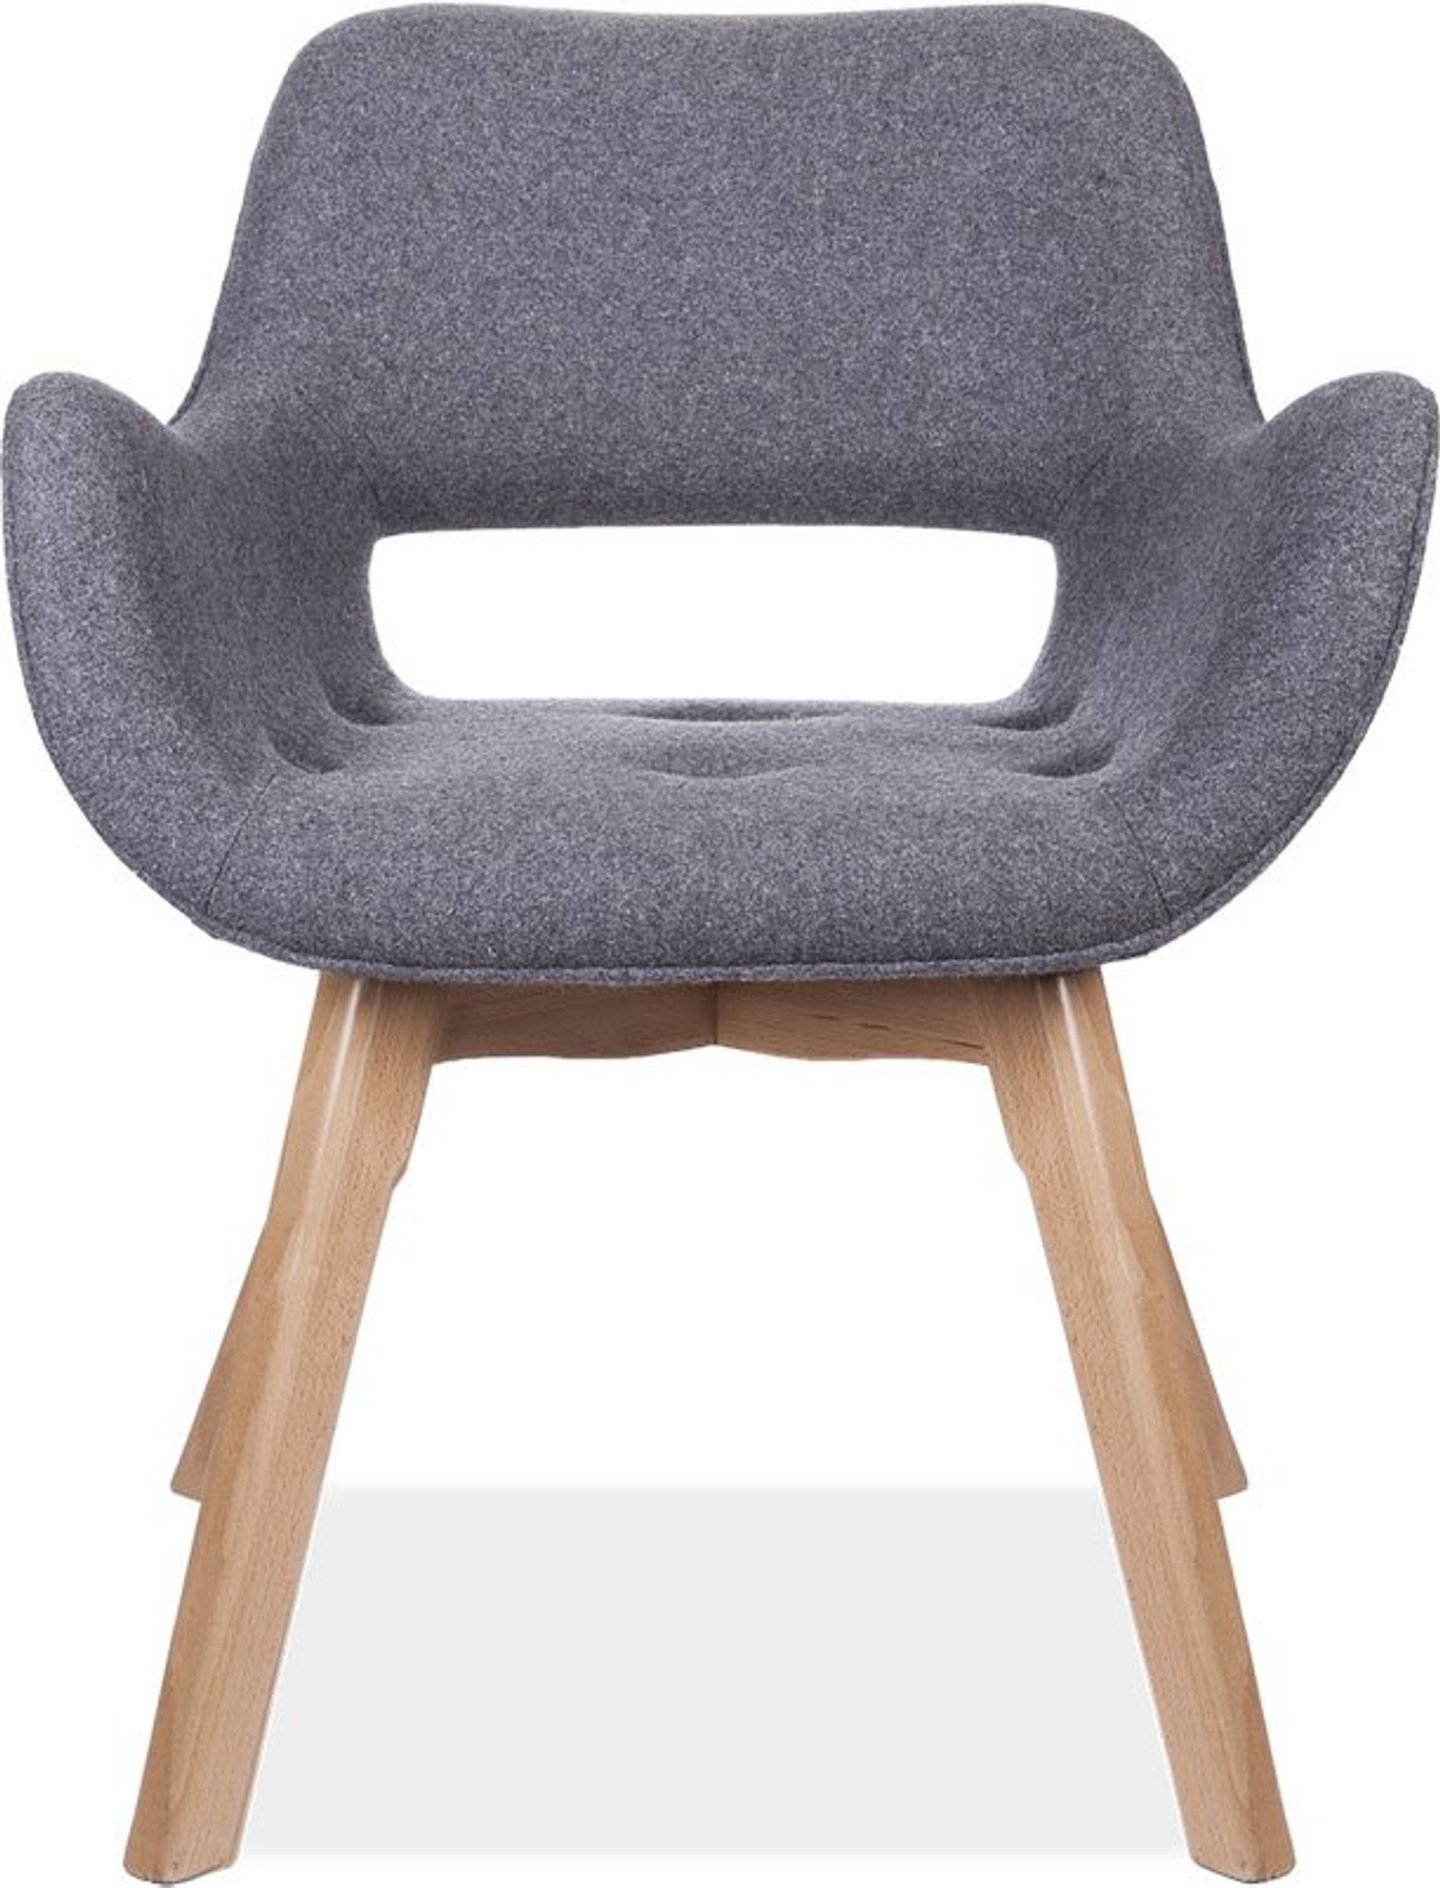 Fabric Dining Chair Grey image.